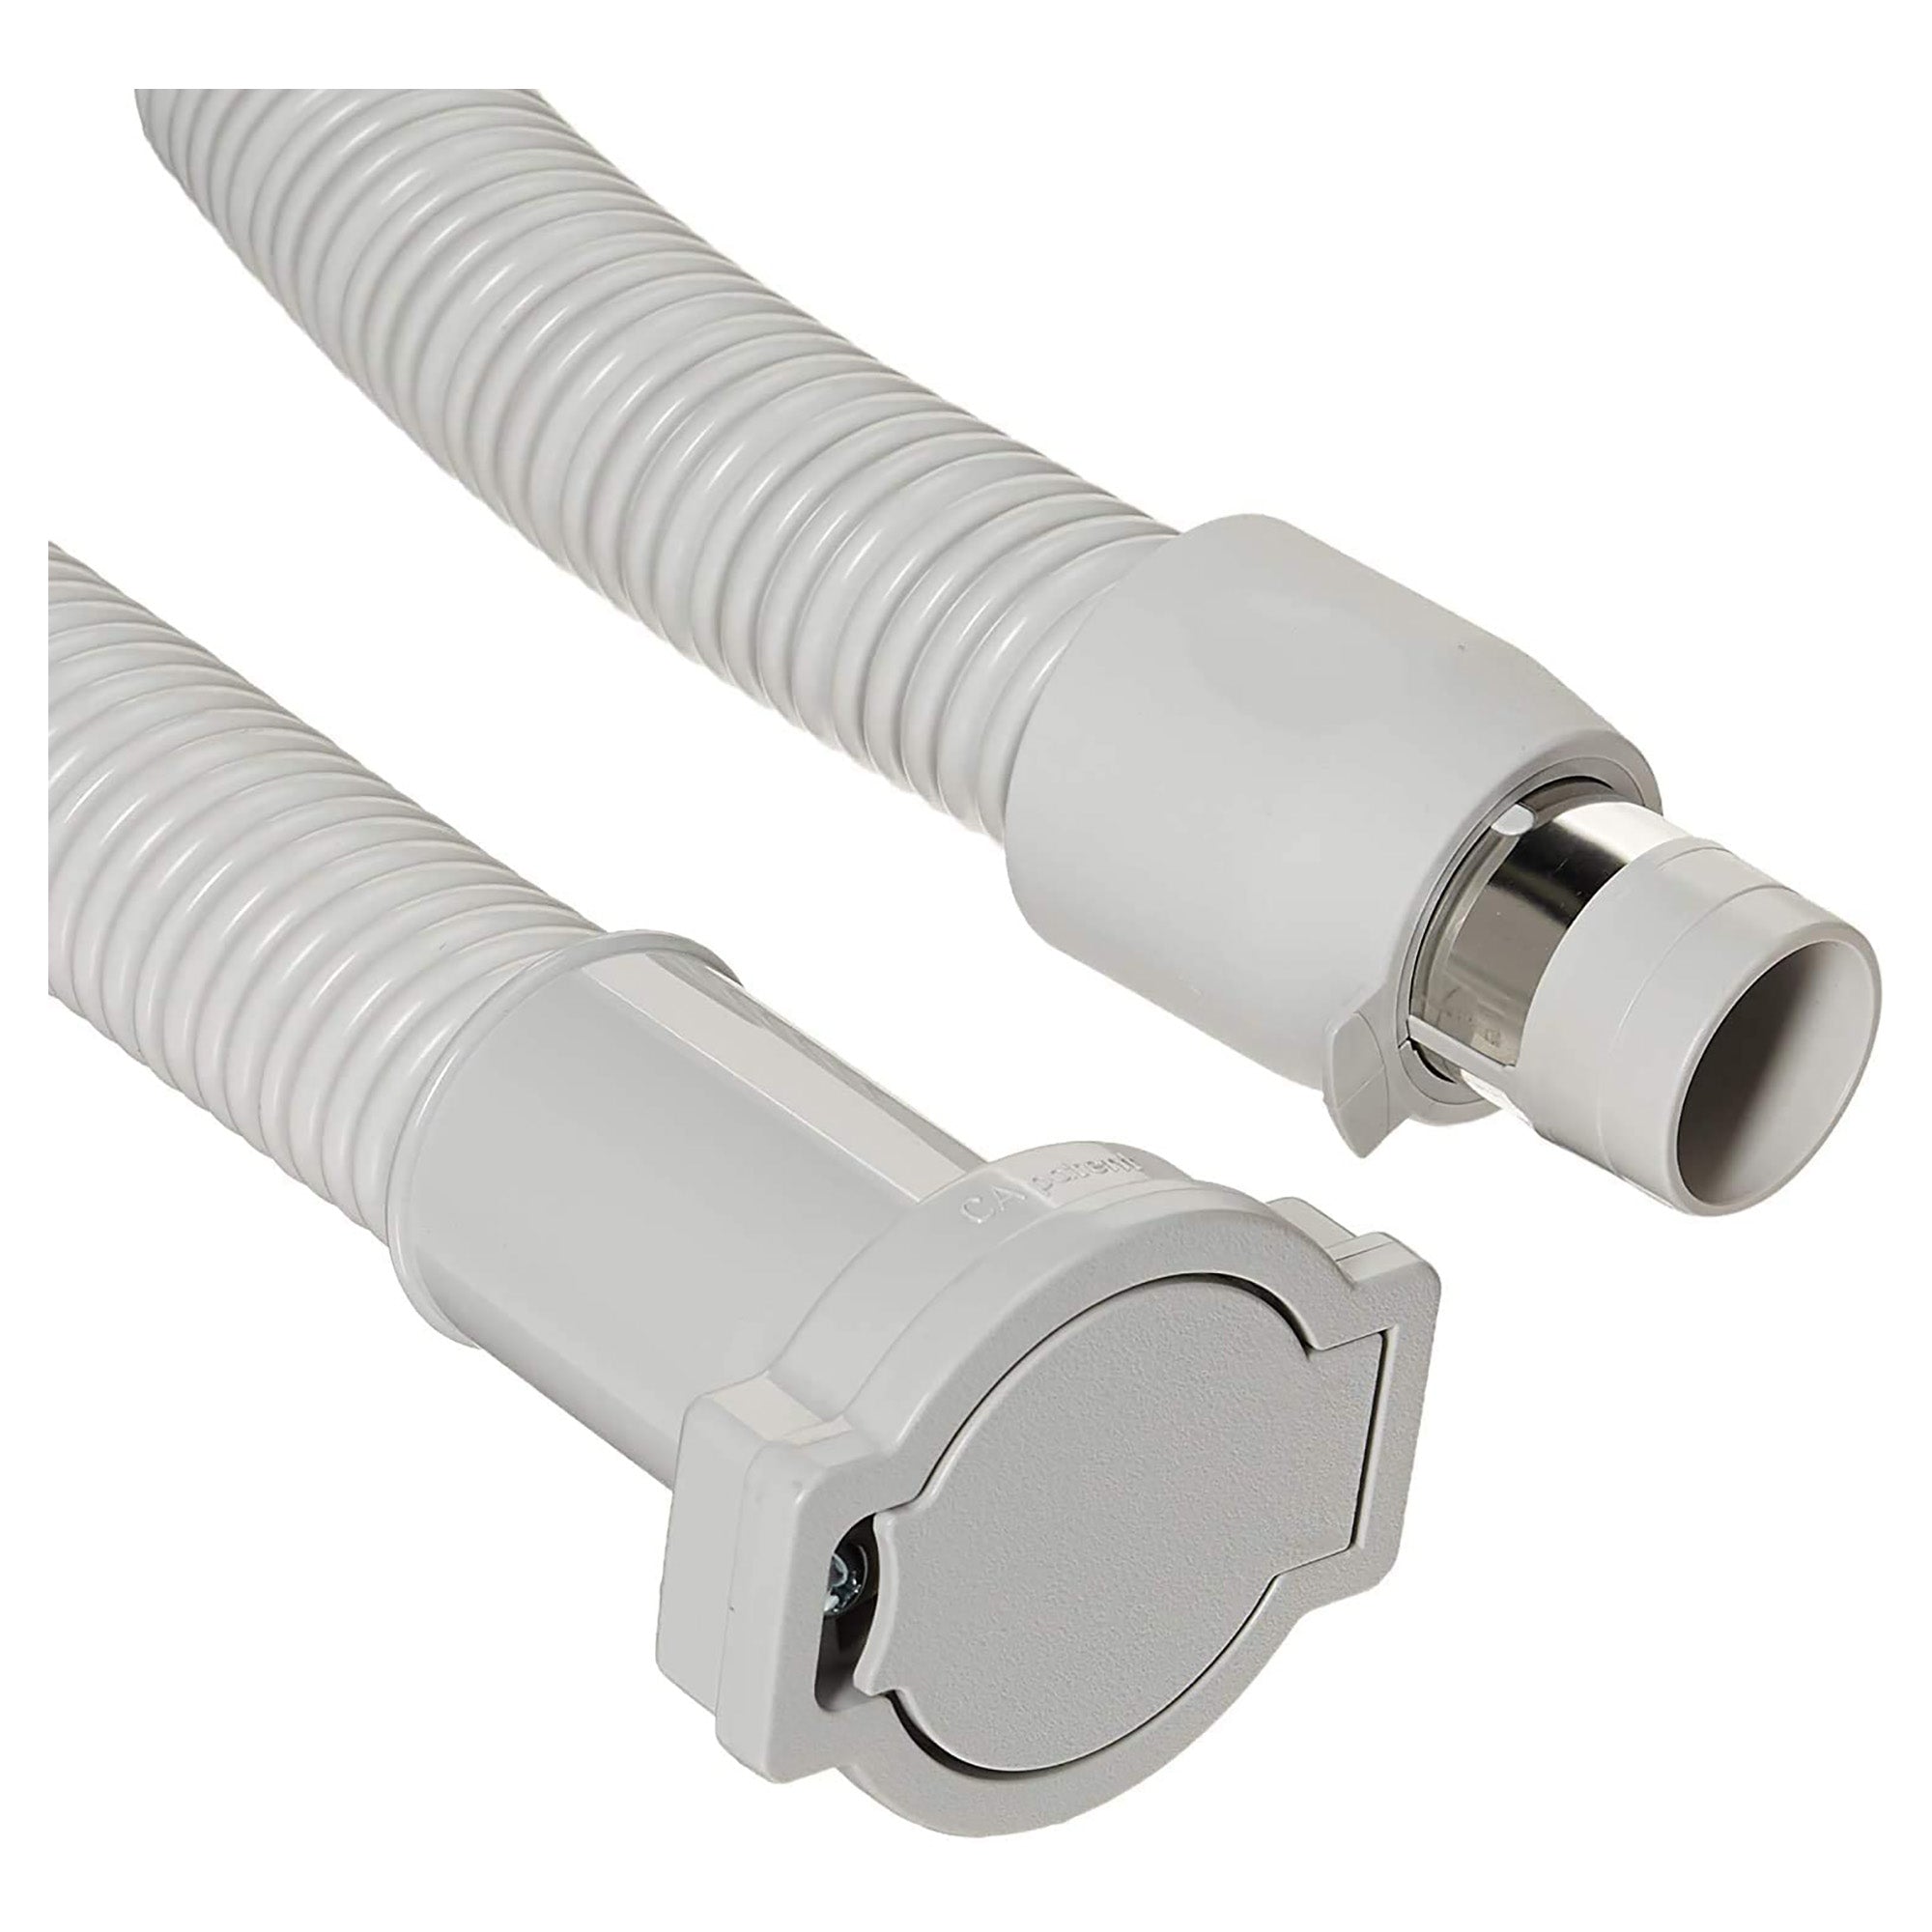 VPC Central Vacuum Cleaner Low Voltage Hose Extension 12' | Fits All Standard 1.5 Wall Inlet